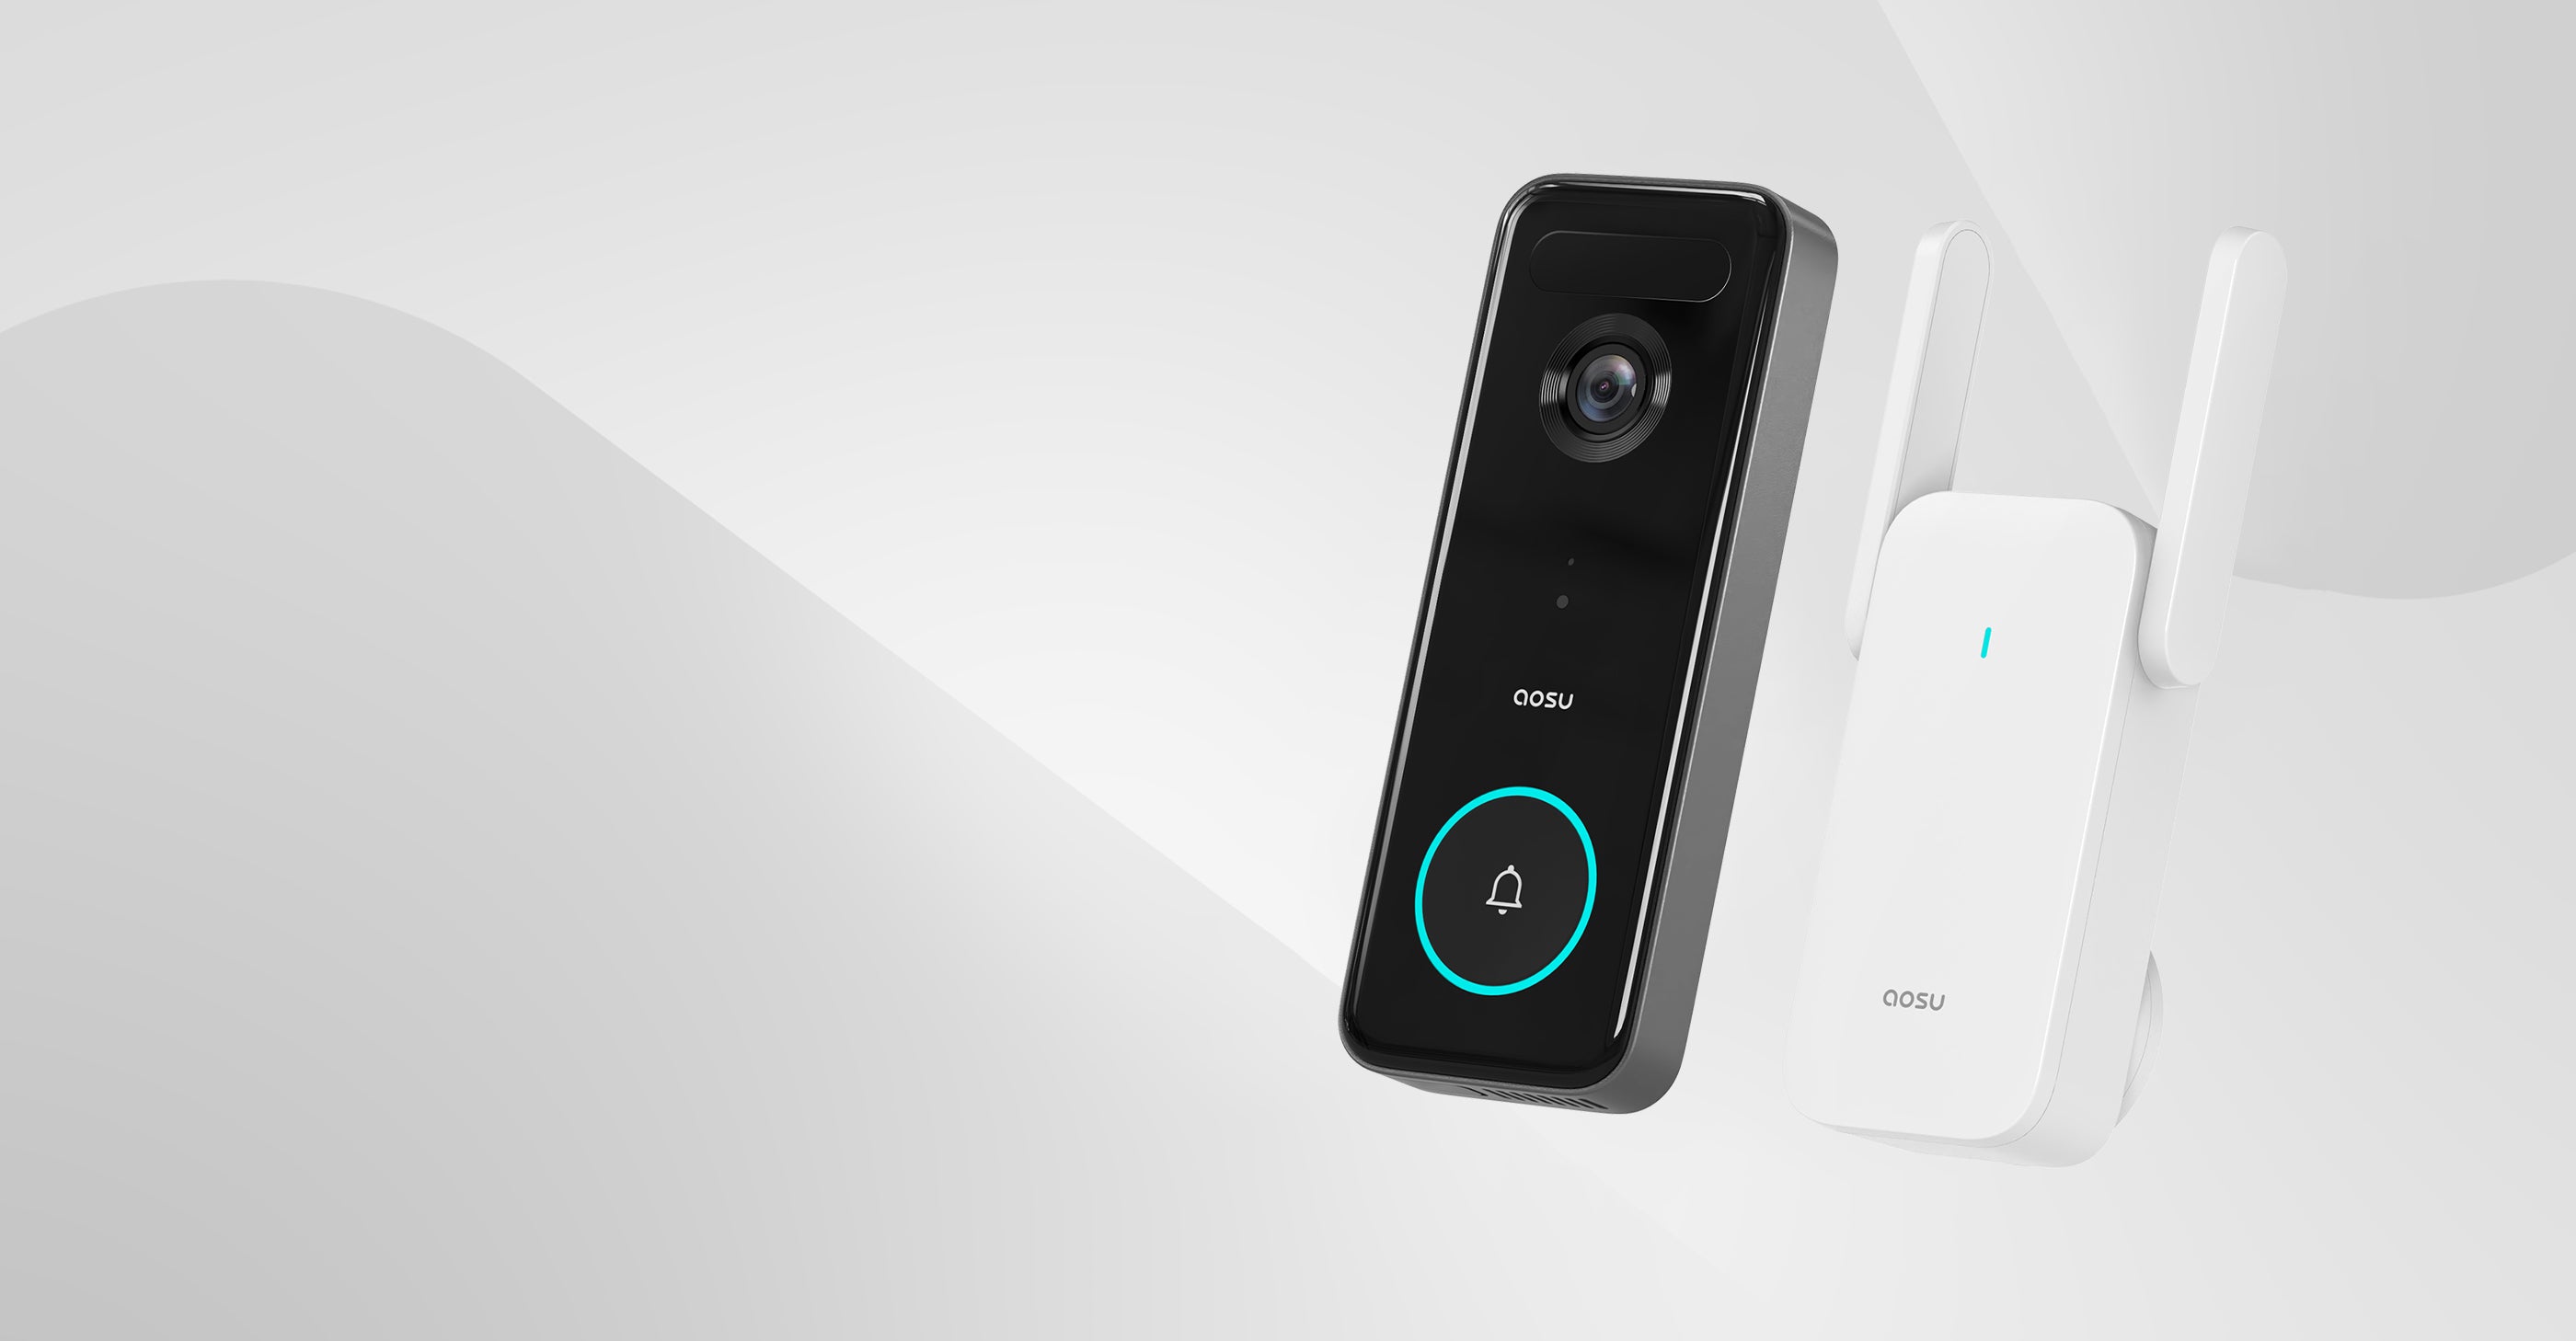 Video Doorbell  Security Camera - Family Safety Our Priority